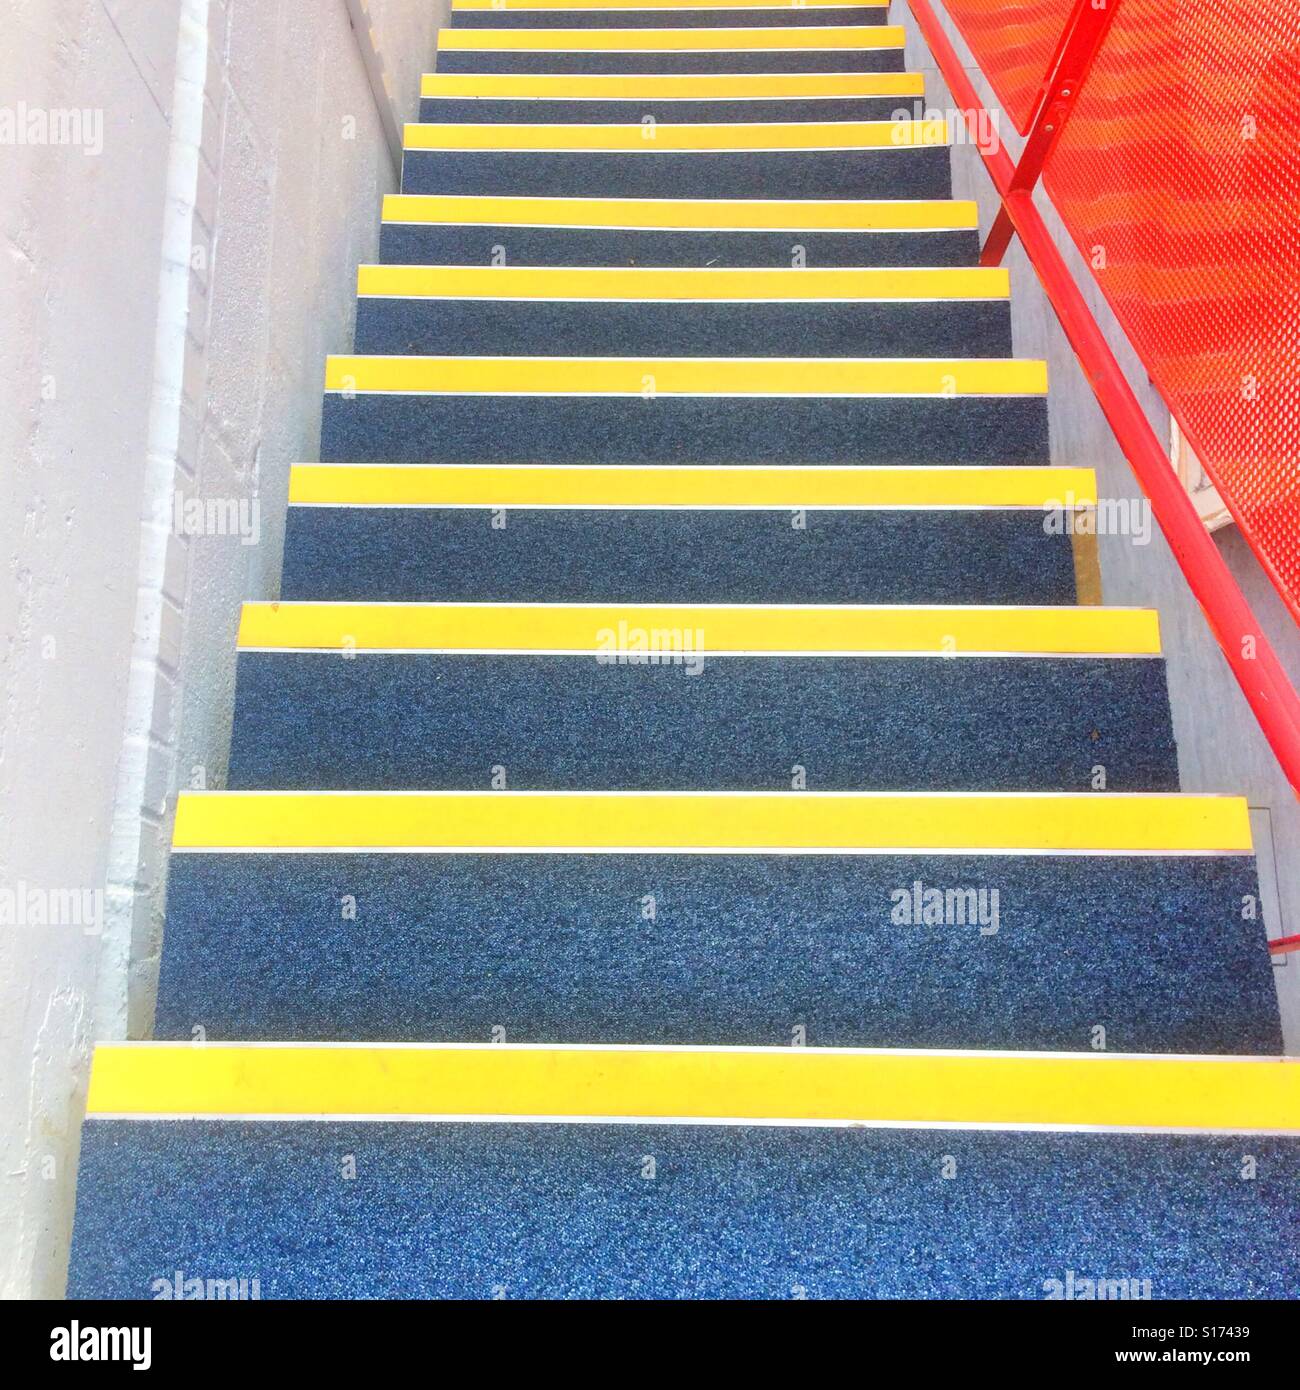 Stairway with bright yellow safety  warning strips Stock Photo